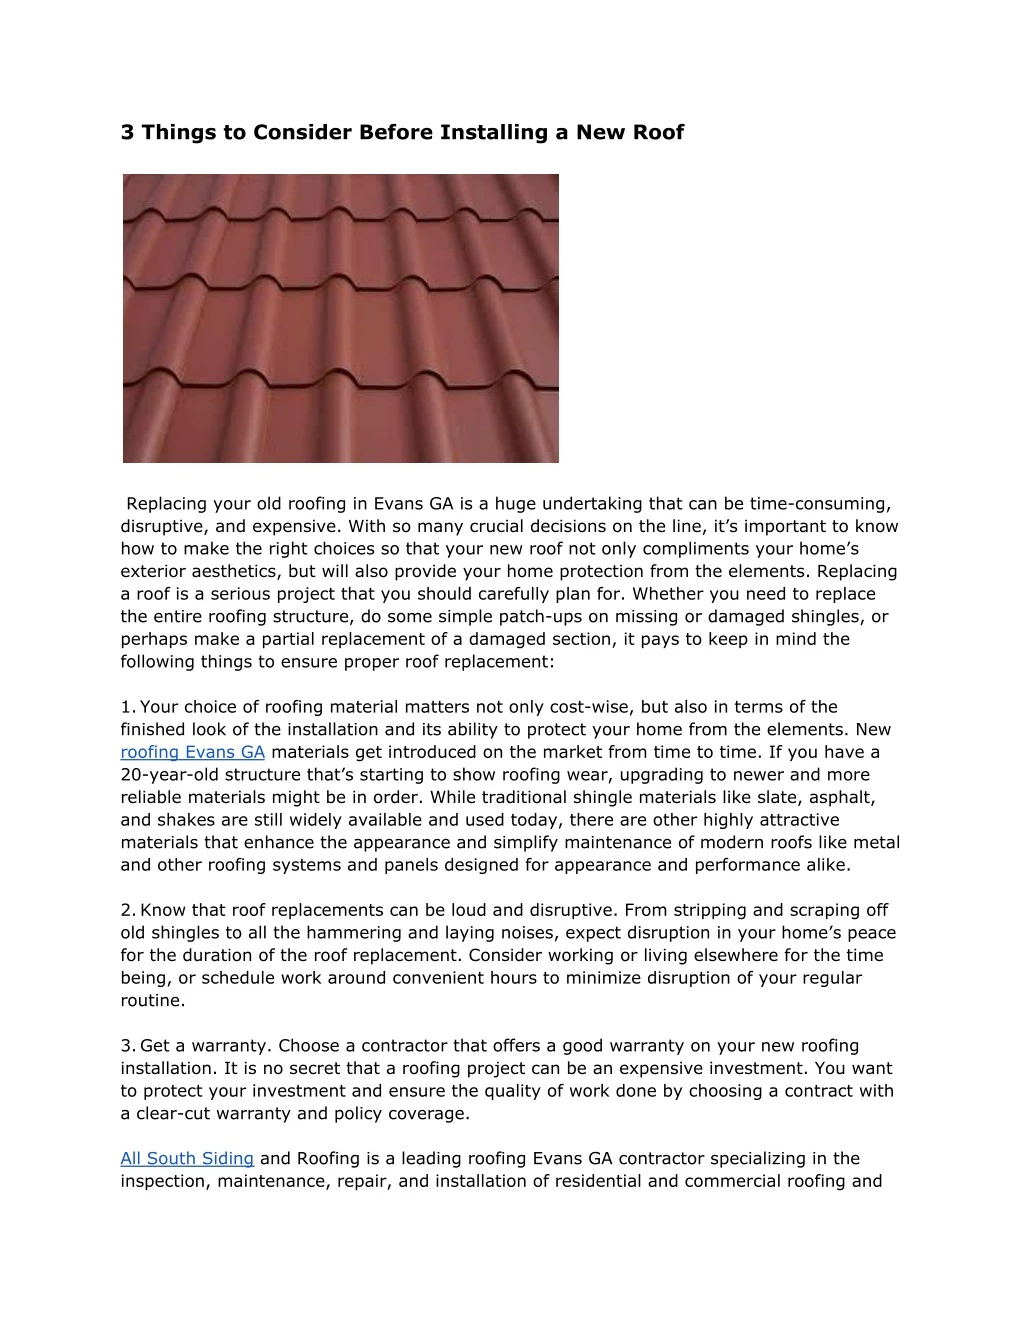 3 things to consider before installing a new roof